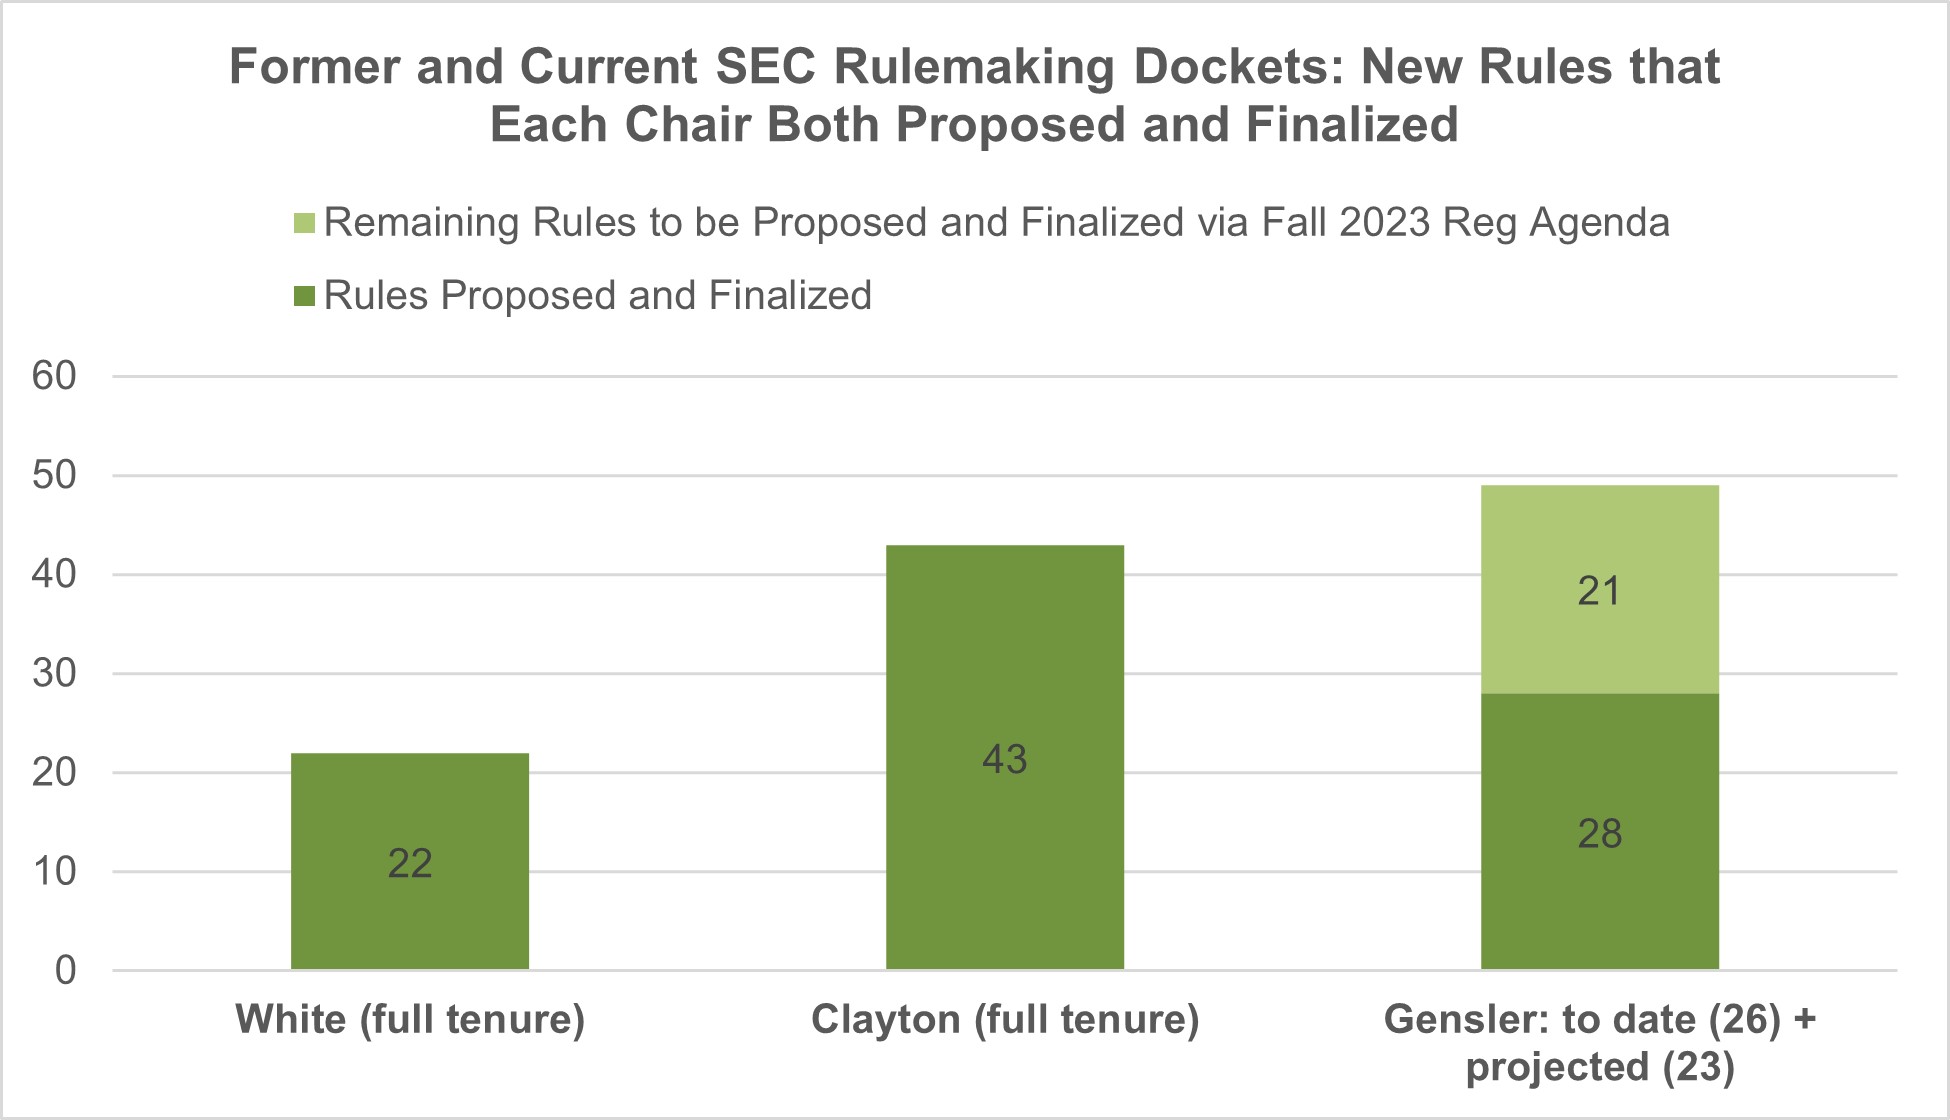 Chart showing the former and current SEC rulemaking dockets: new rules that each chair both proposed and finalized